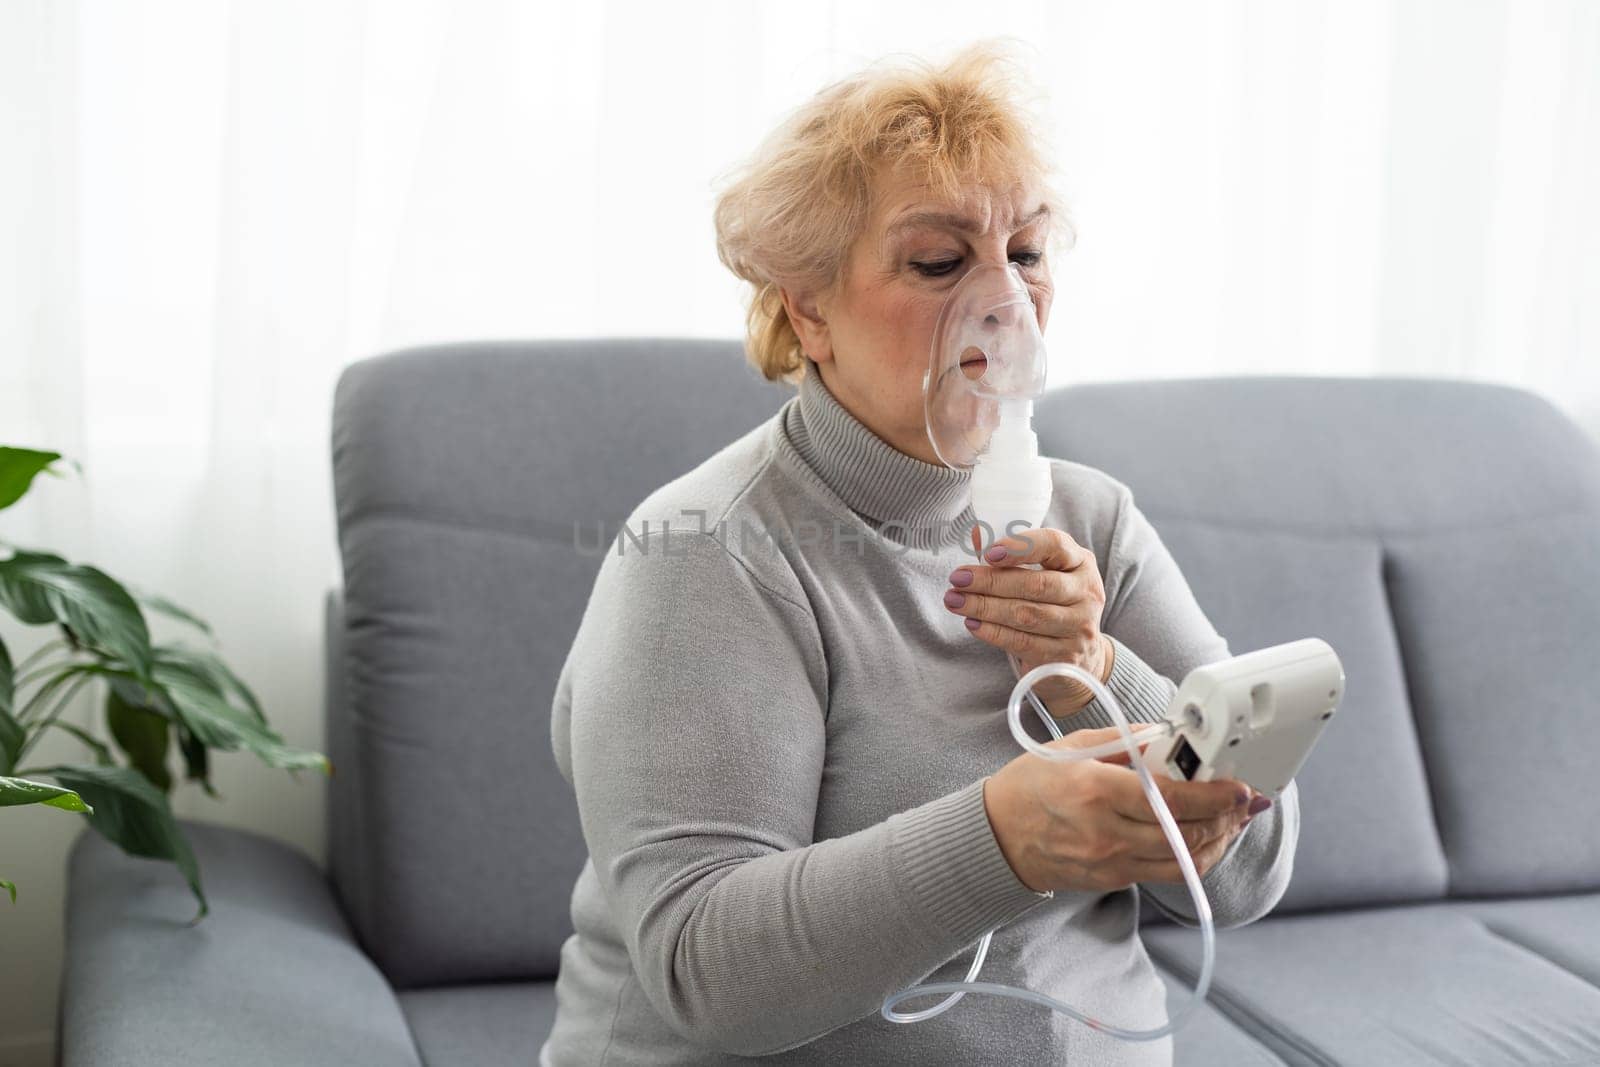 Senior woman using a nebulizer makes inhalation at home and looks at the camera by Andelov13